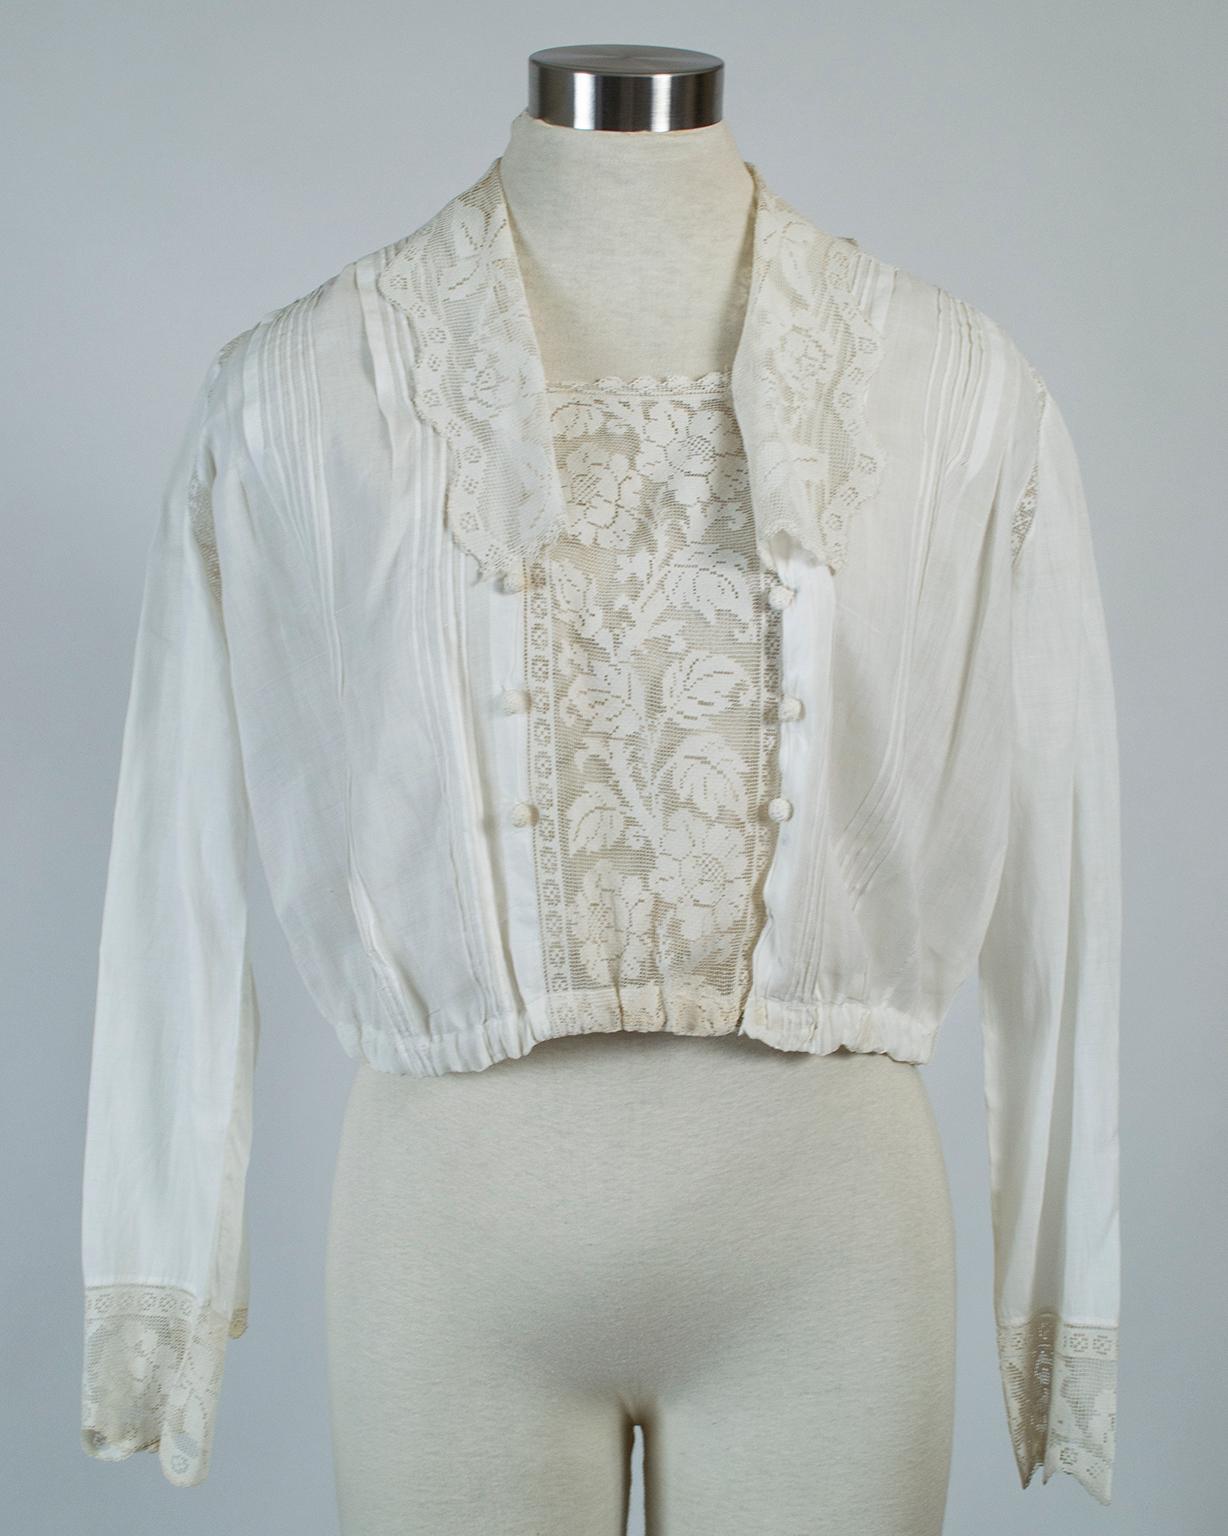 Another example of the Edwardians’ love of contradiction, this blouse covers every square inch of the torso but does so with transparent filet lace, which reveals almost as much as it conceals. We love how the cropped length and elastic waist create